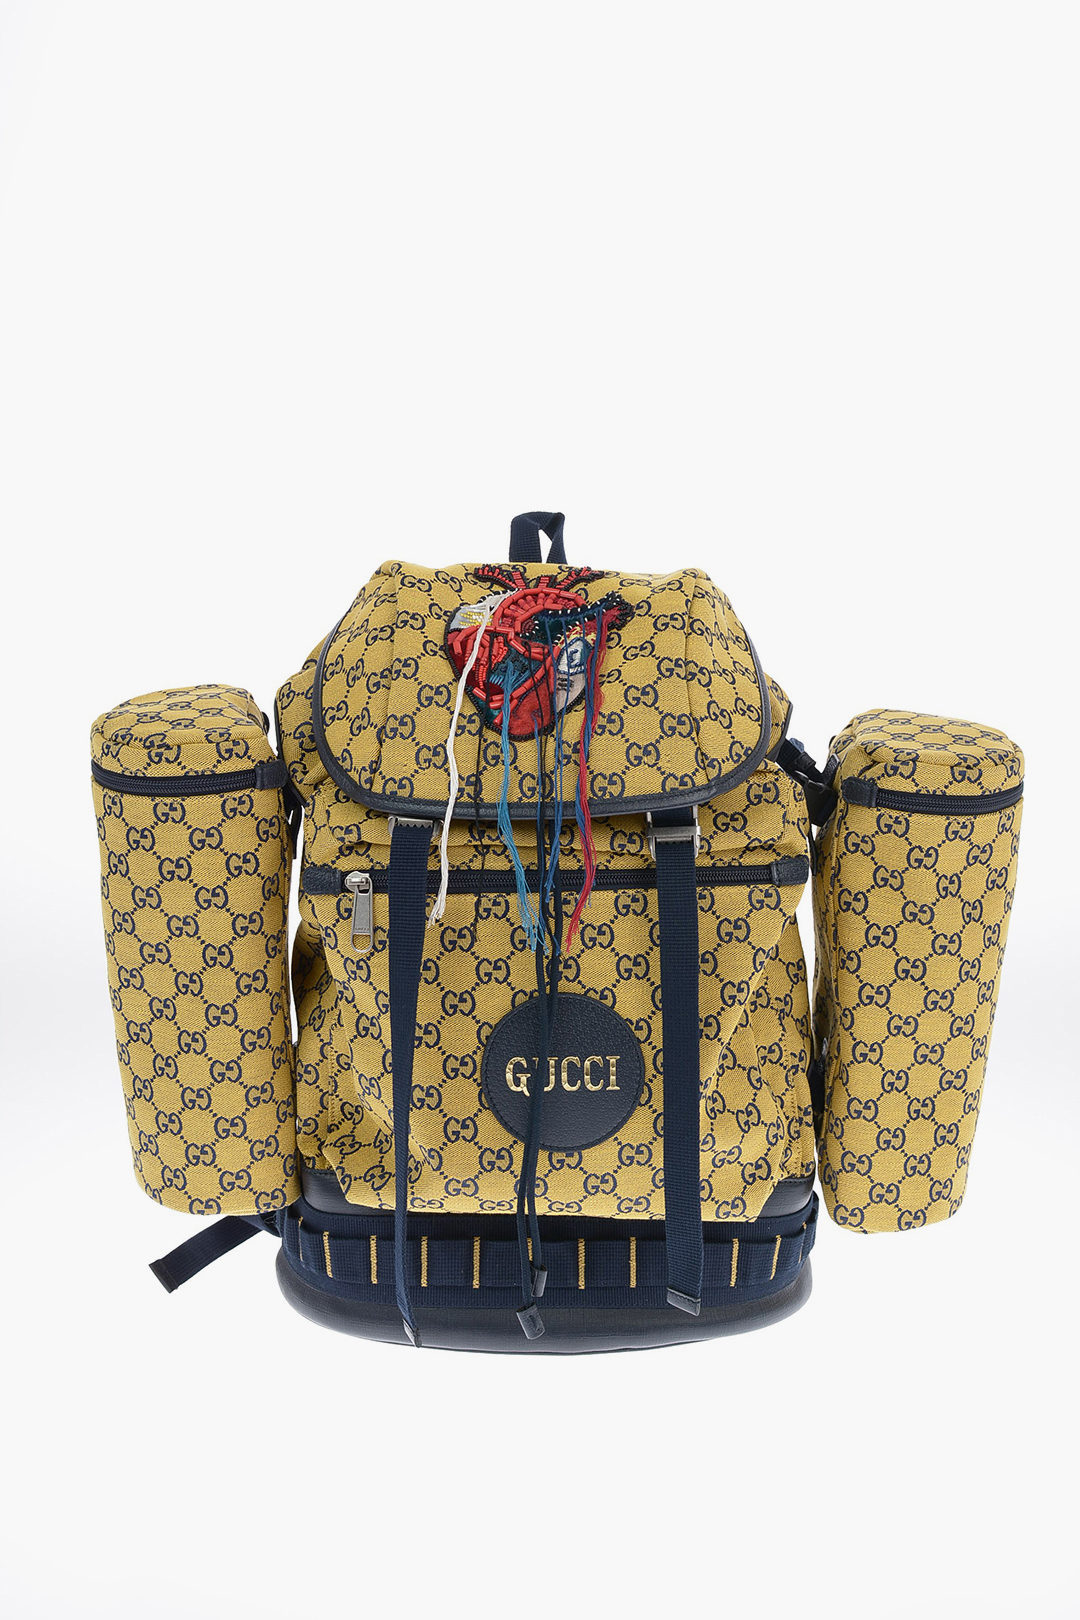 Gucci Fabric Maxi Monogram Utility GG Backpack men - Glamood Outlet